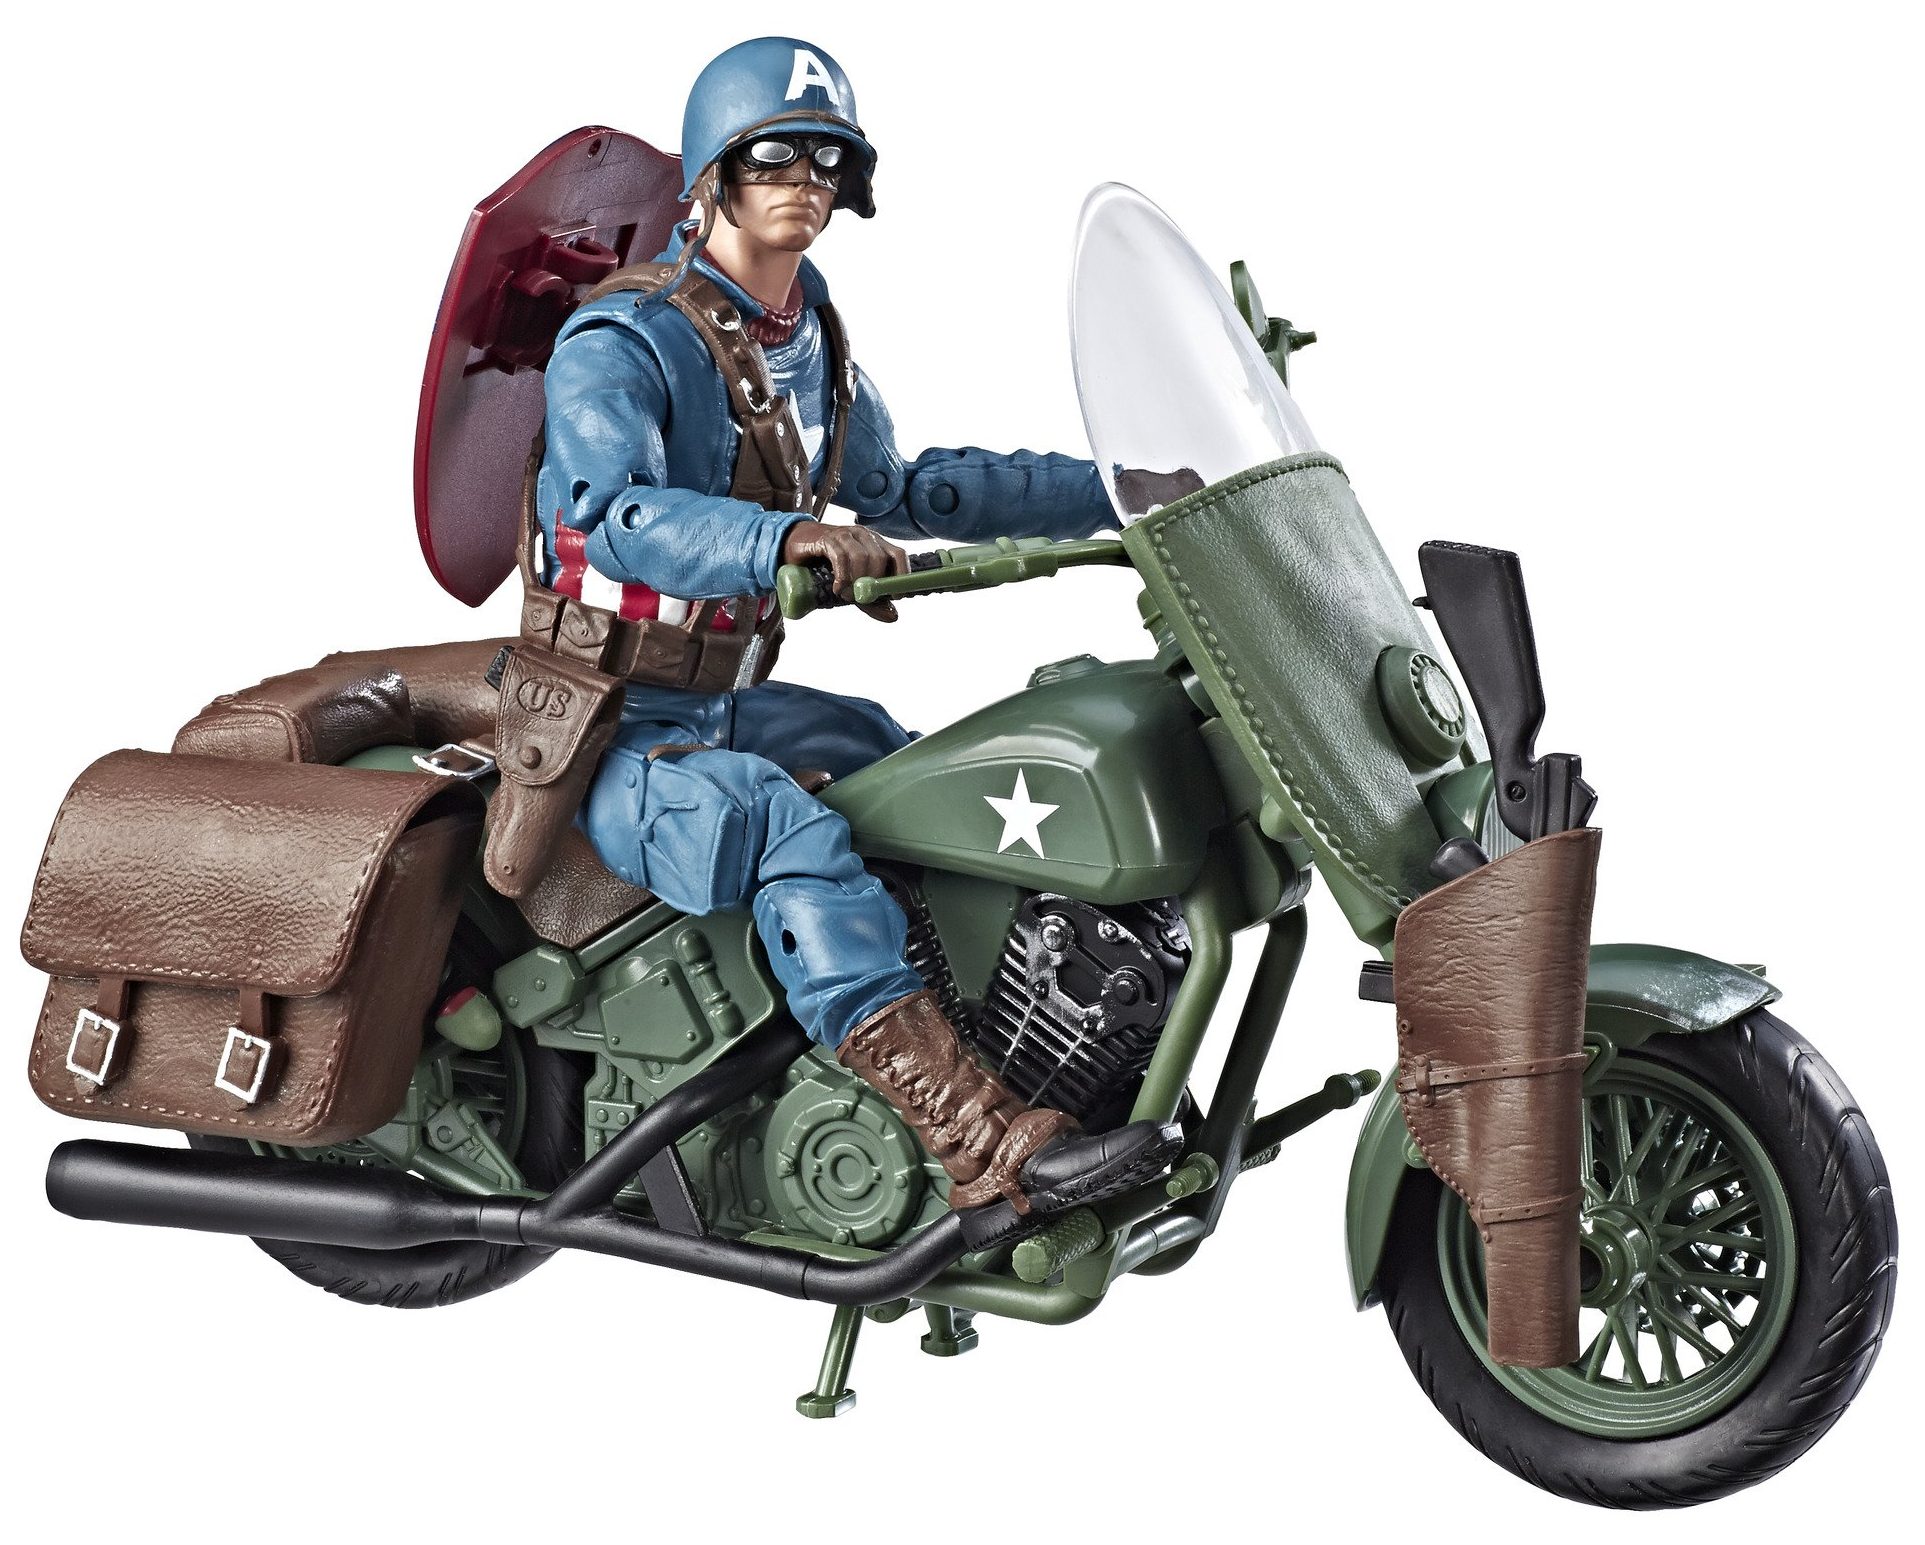 Marvel Legends Riders Captain America On WWII Motorcycle Set E1562862923932 